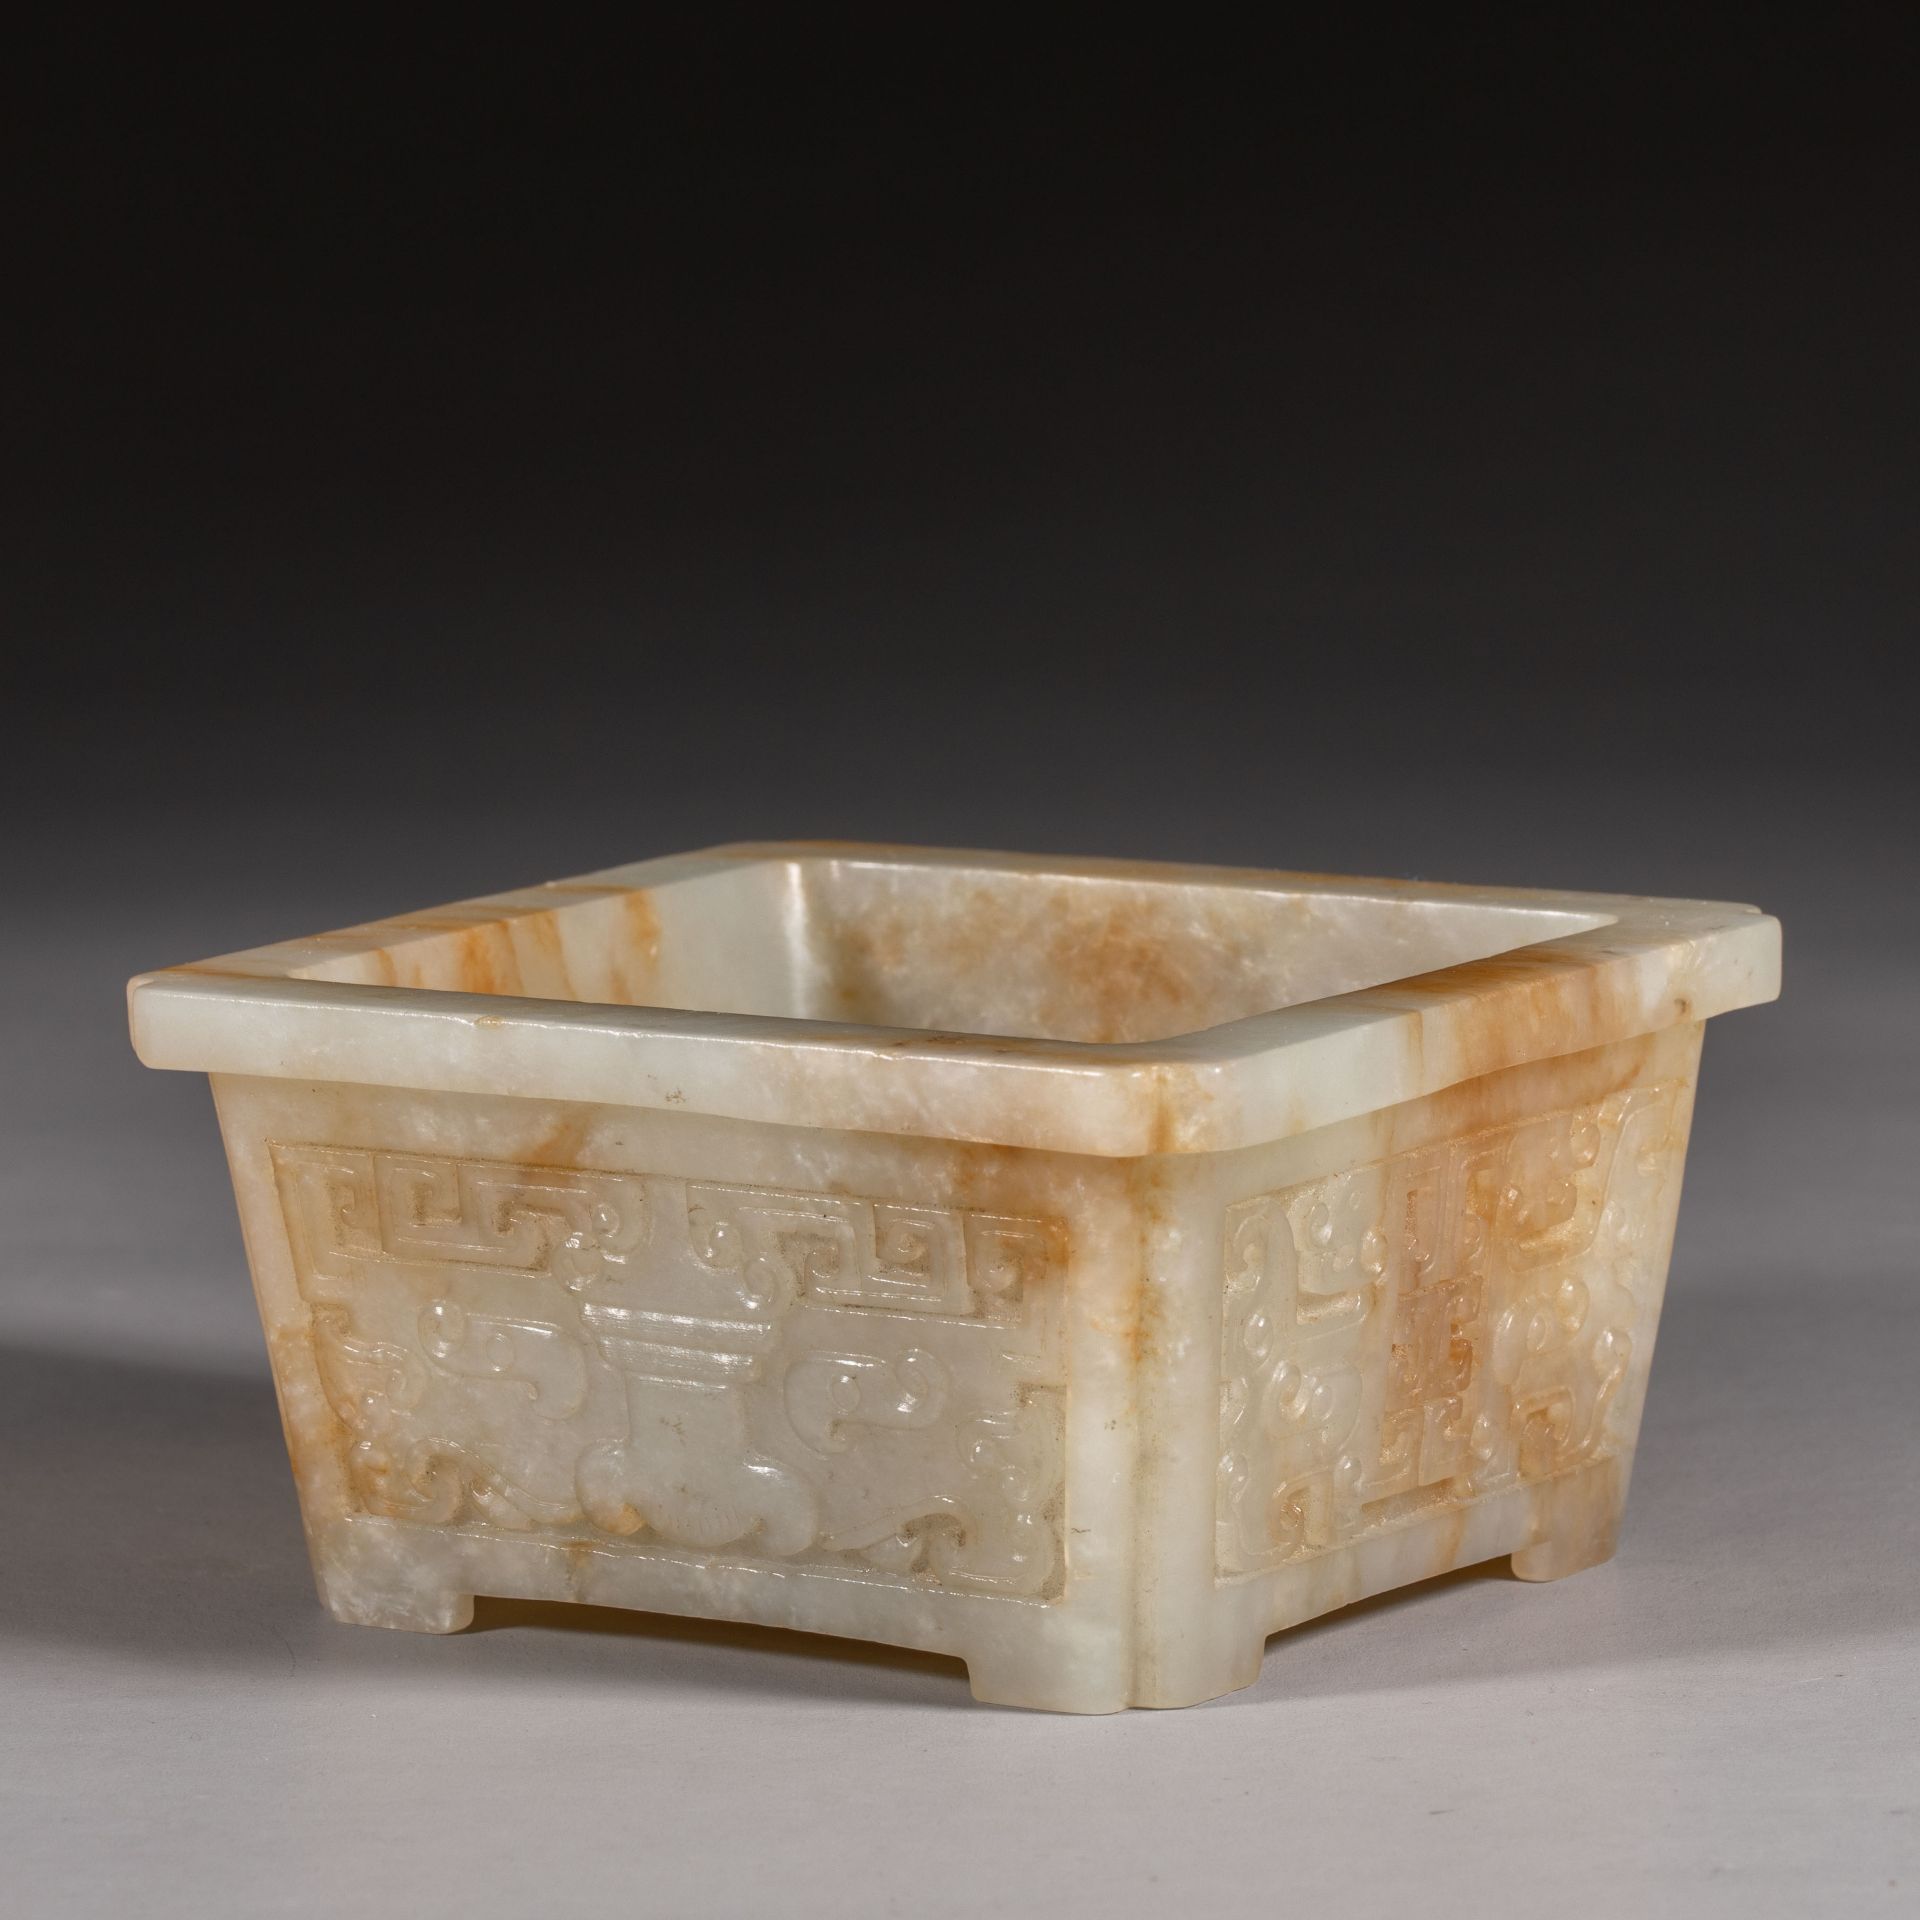 Hetian jade stove from Ming dynasty  - Image 4 of 7